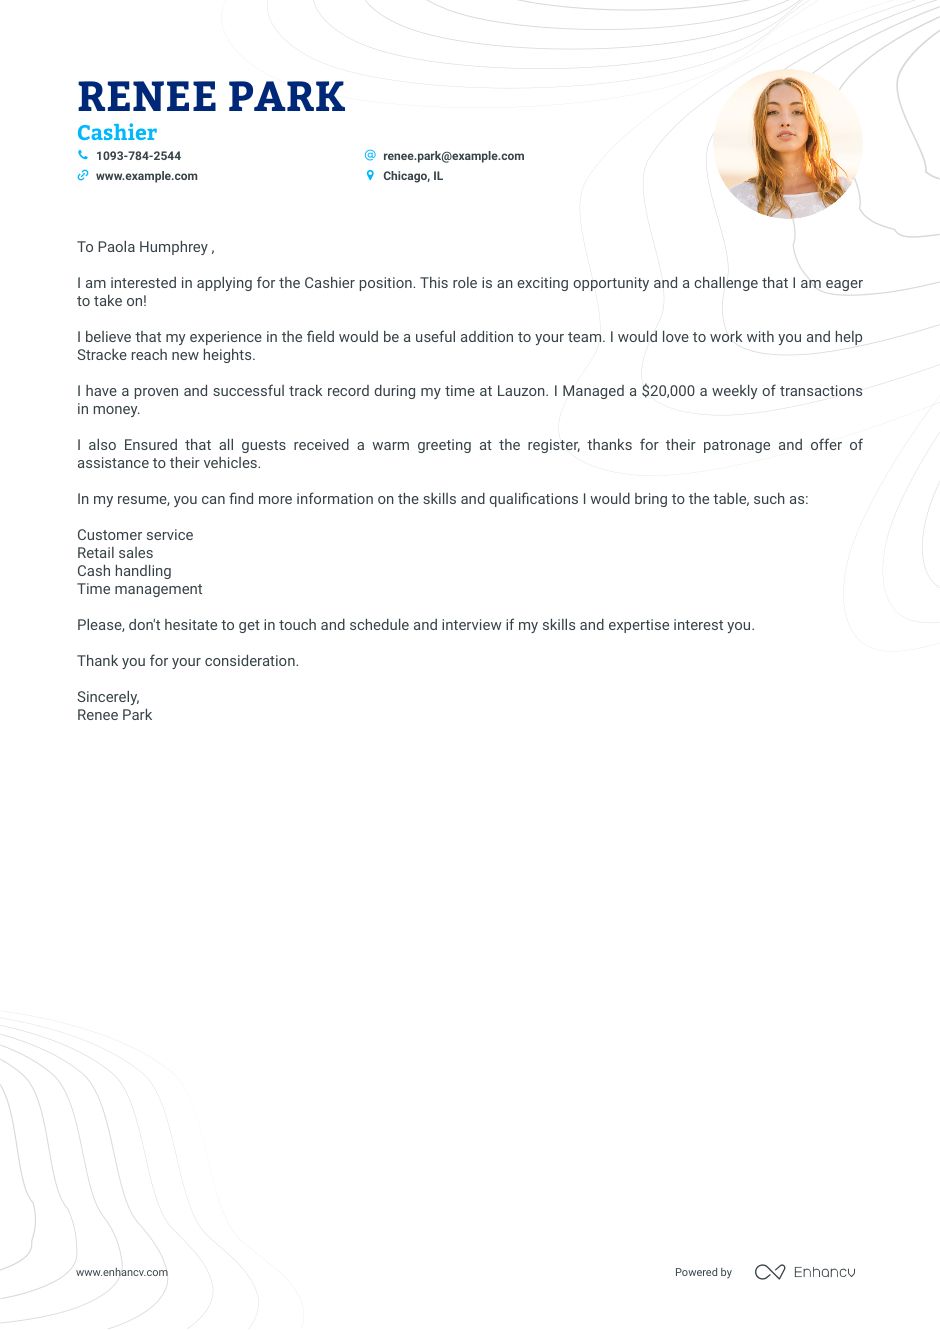 Application Letter for Sales Girl Template - Edit Online & Download Example